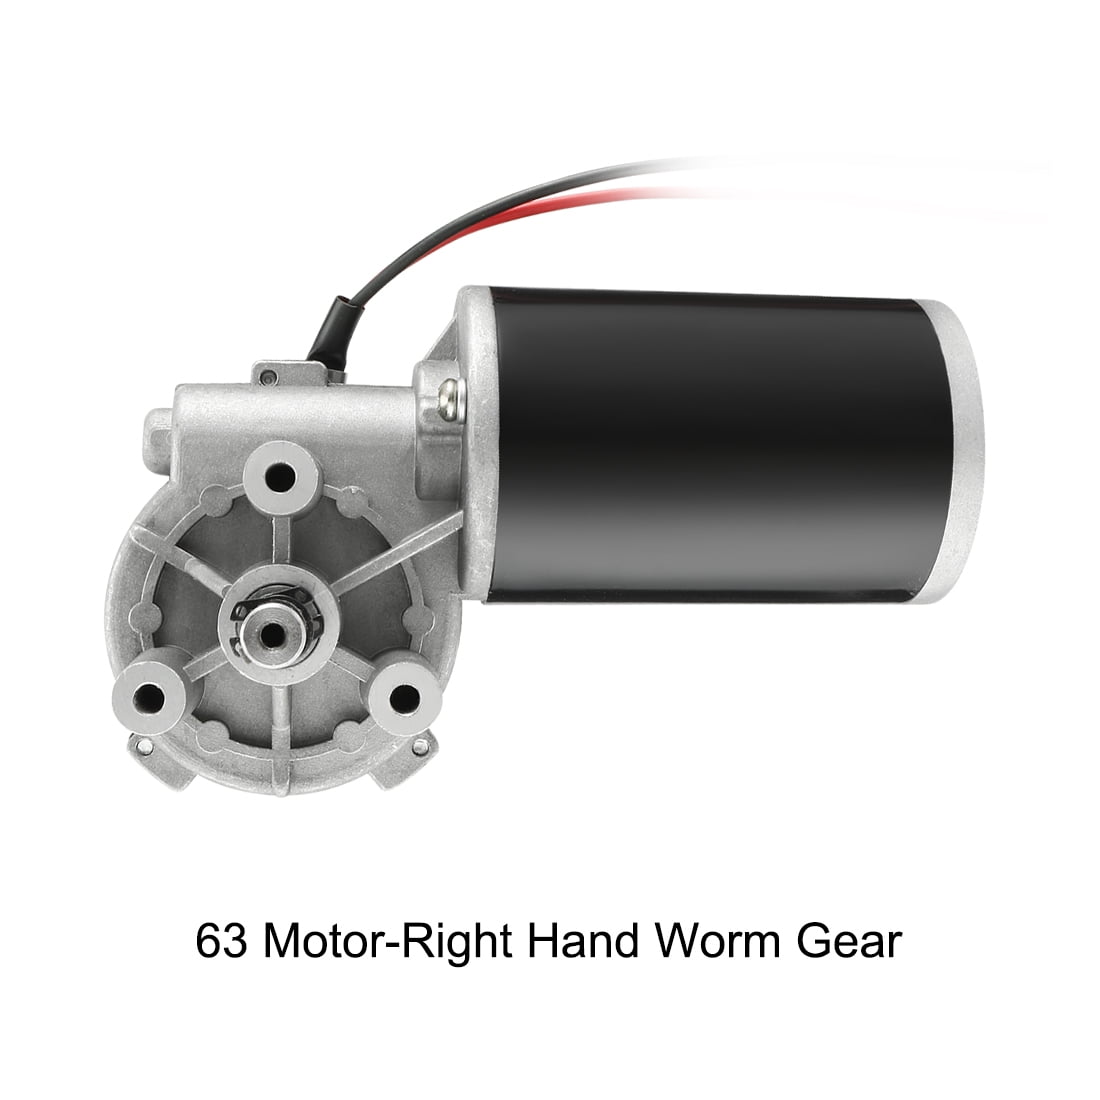 Reversible Worm Gear Motor 110v Electric High Torque Speed Reducing 60rpm 80w for sale online 